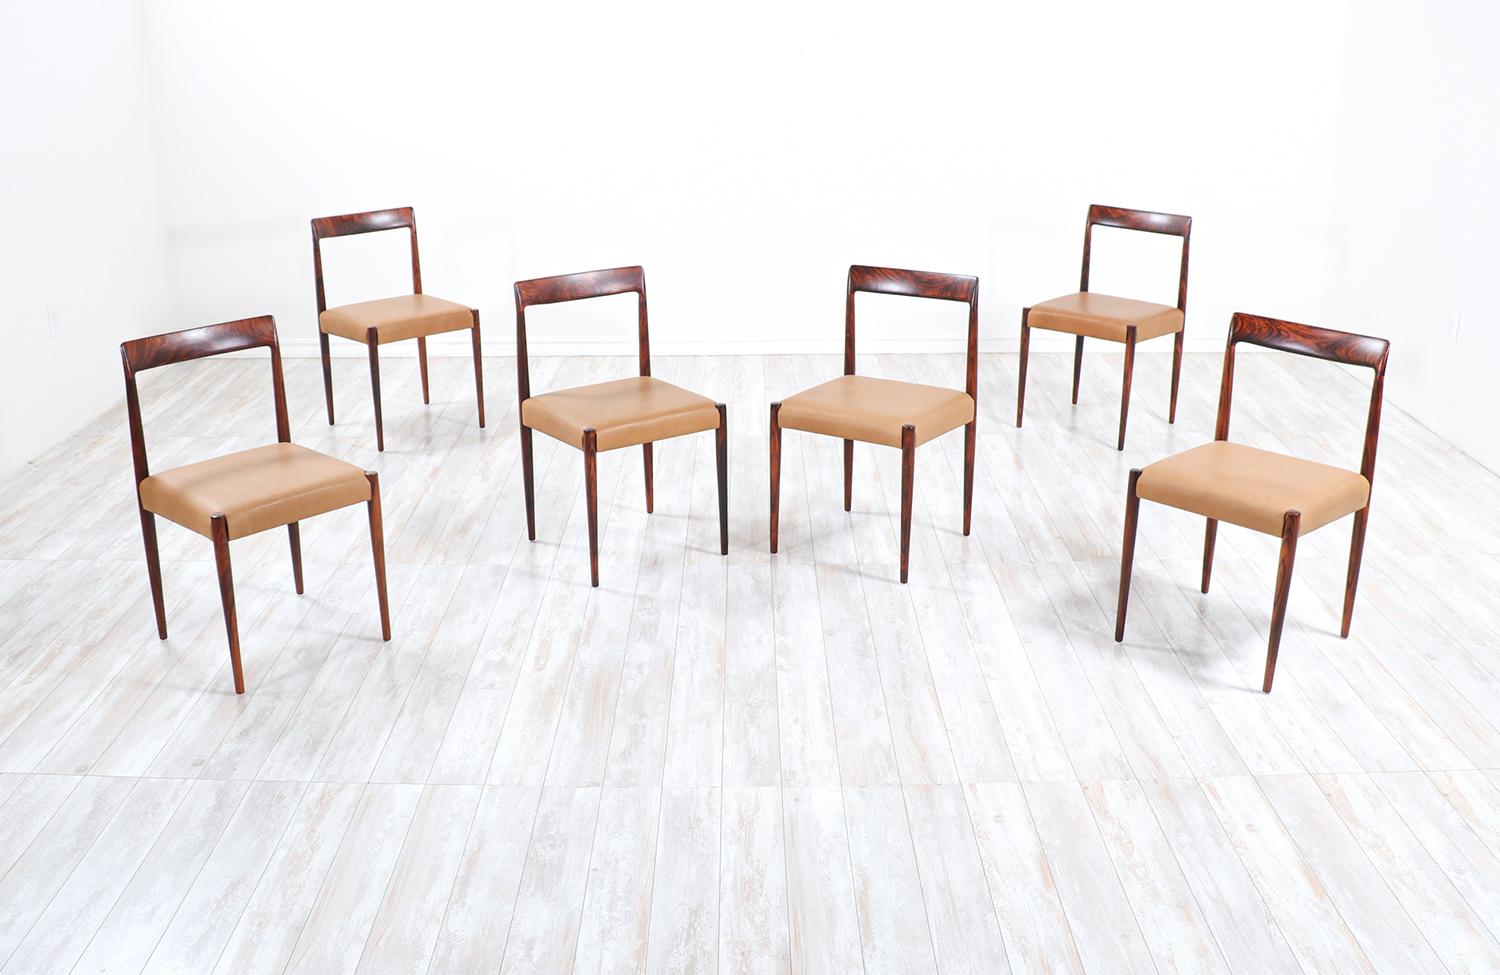 German Set of 10 Mid-Century Modern Rosewood and Leather Dining Chairs by Lübke